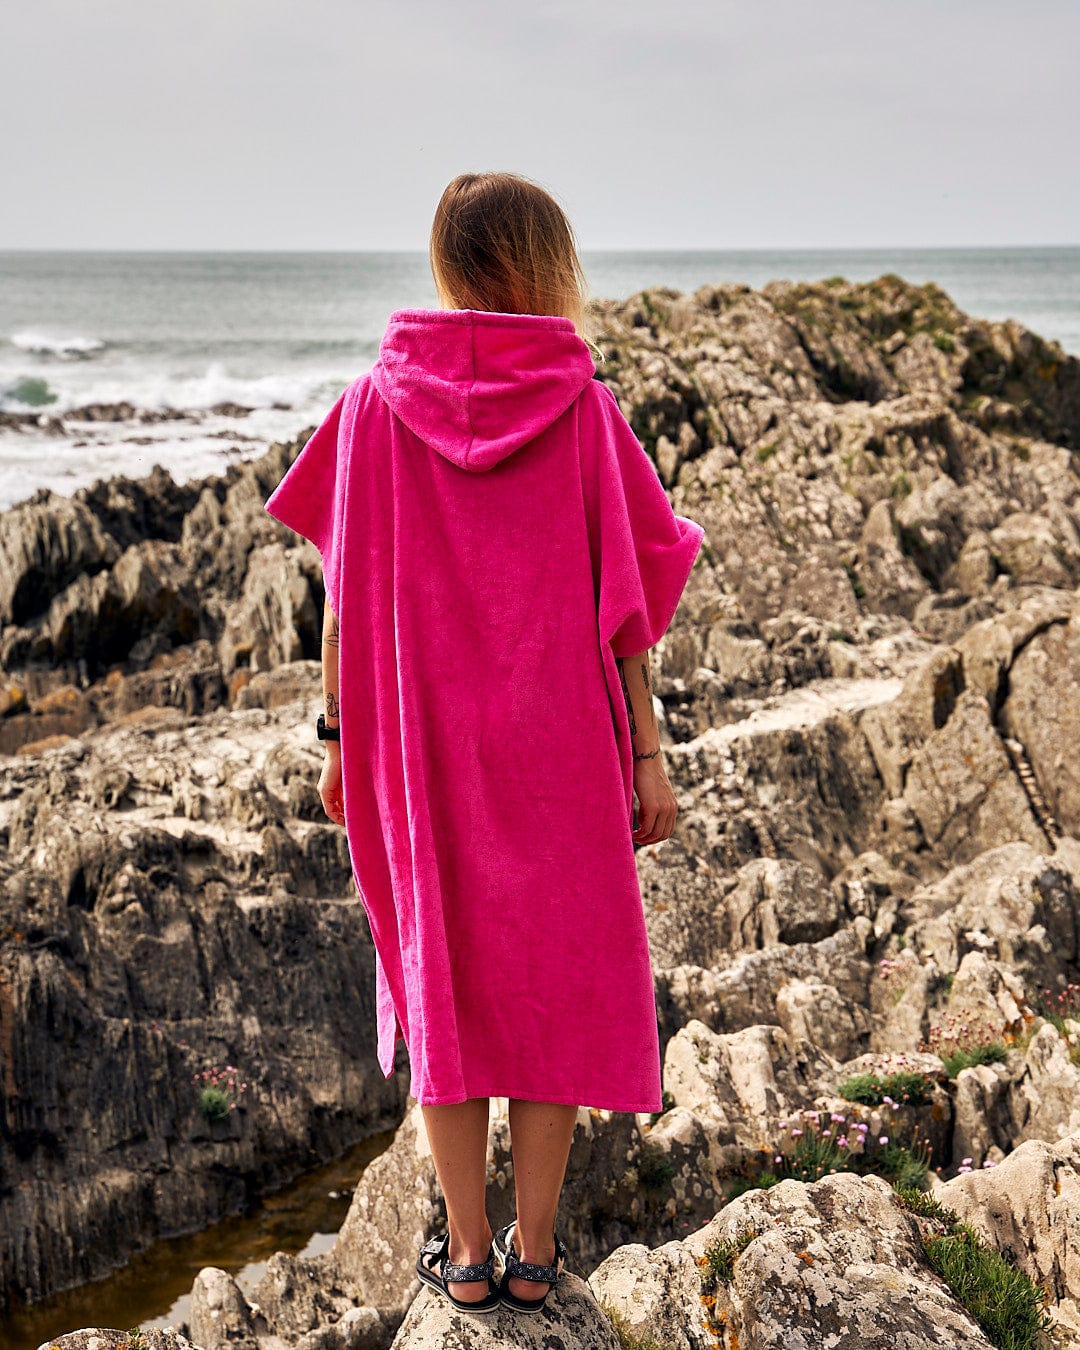 Woman in a Corp Changing Towel - Bright Pink towelling material towel, branded with Saltrock, standing on rocky coast, looking out to sea.